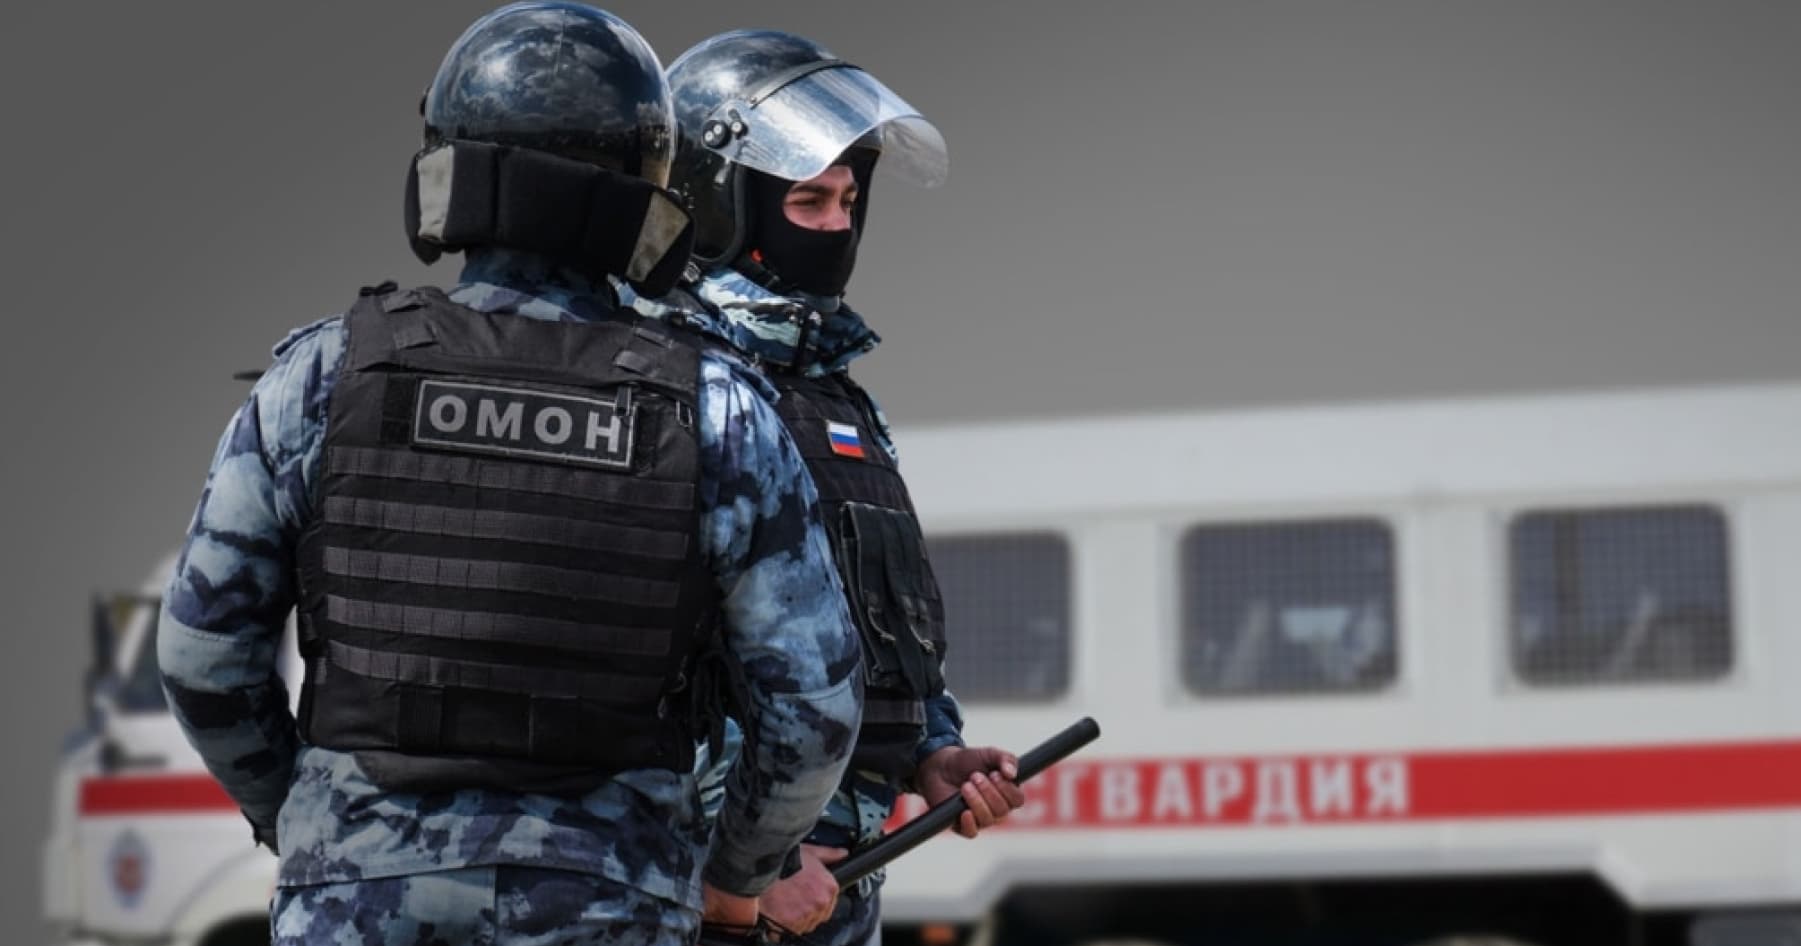 About 90% of call-up papers in the temporarily occupied Crimea were received by Crimean Tatars — human rights defenders